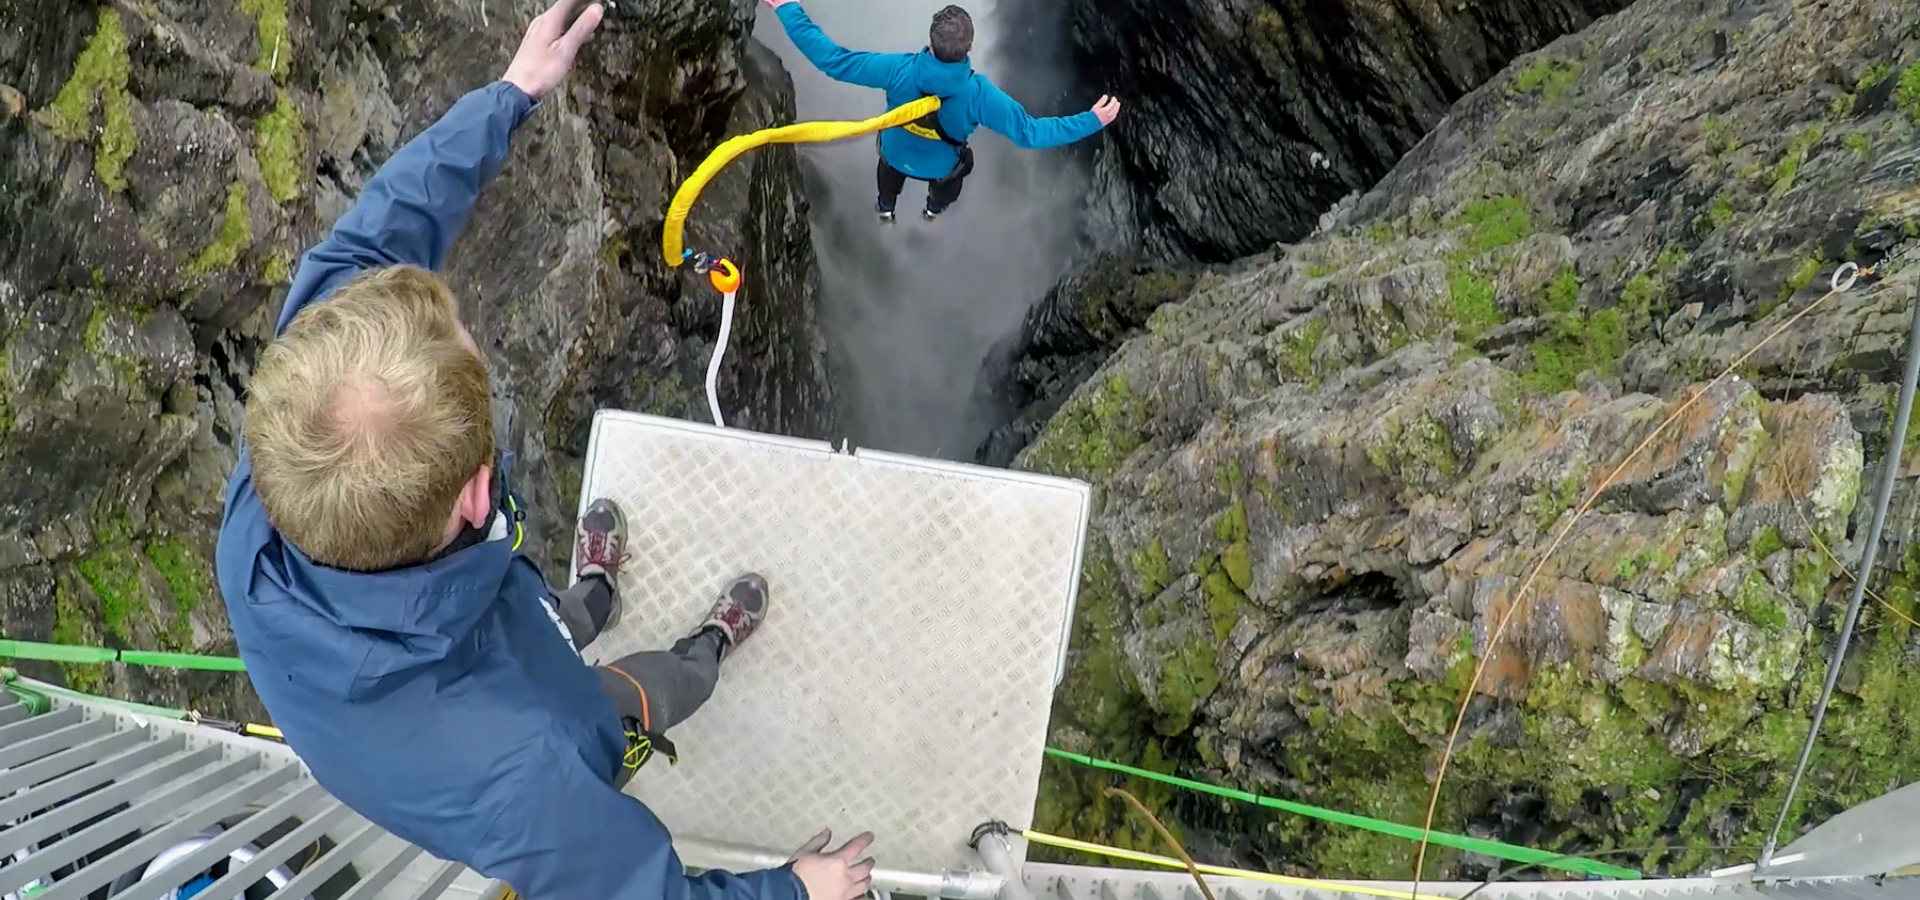 Person watching another person doing a bungee jump near a waterfall